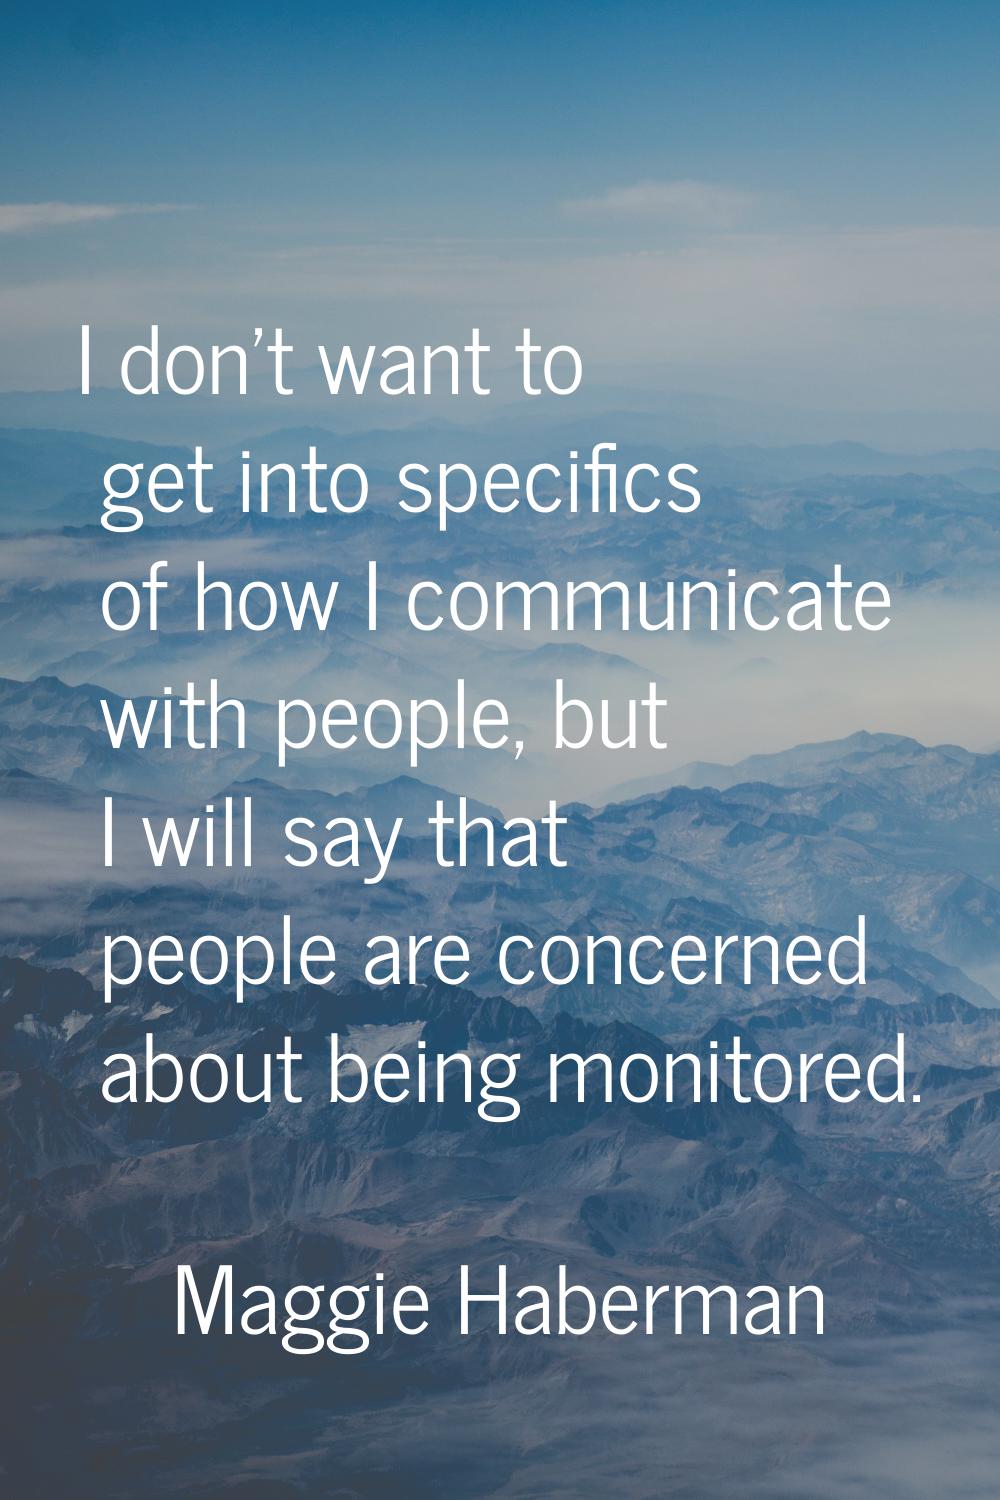 I don't want to get into specifics of how I communicate with people, but I will say that people are